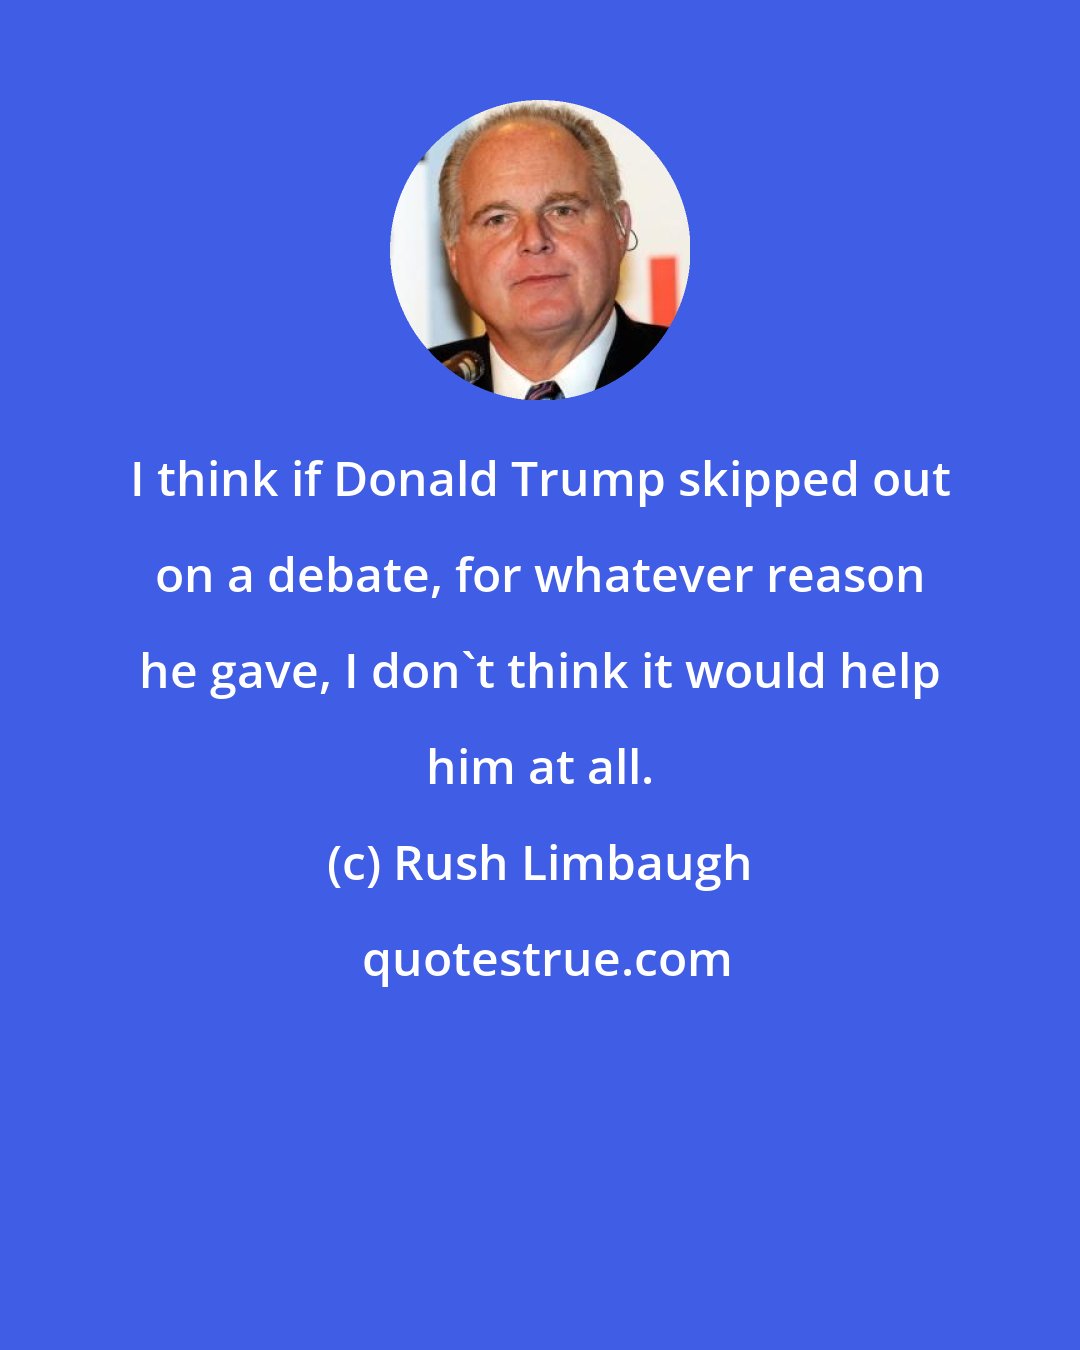 Rush Limbaugh: I think if Donald Trump skipped out on a debate, for whatever reason he gave, I don't think it would help him at all.